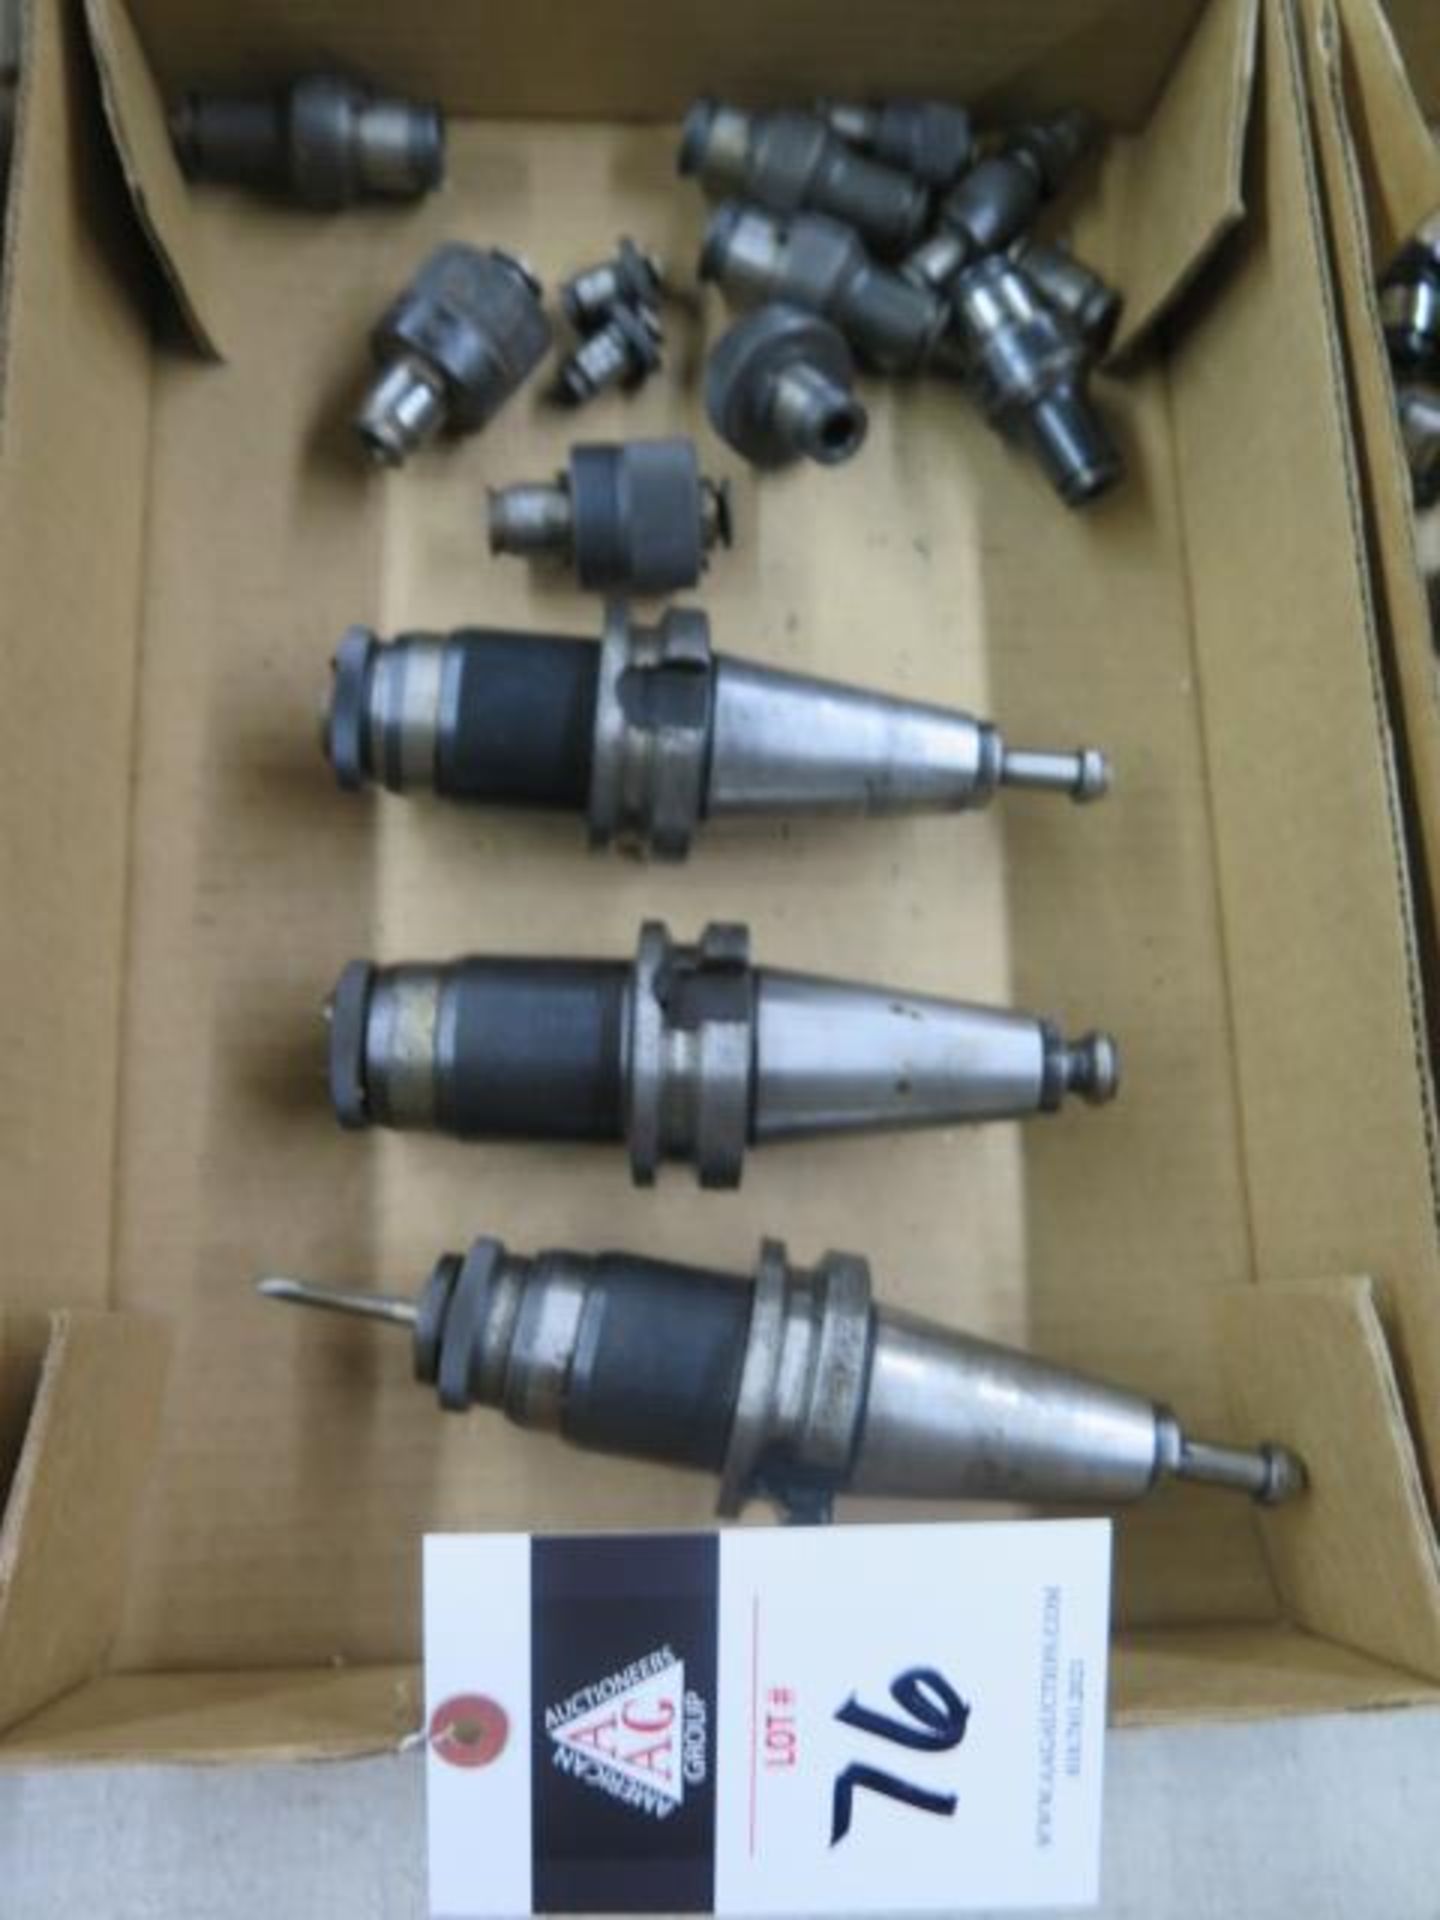 BT-40 Taper Tapping Heads (3) w/ Tap Holders (SOLD AS-IS - NO WARRANTY)